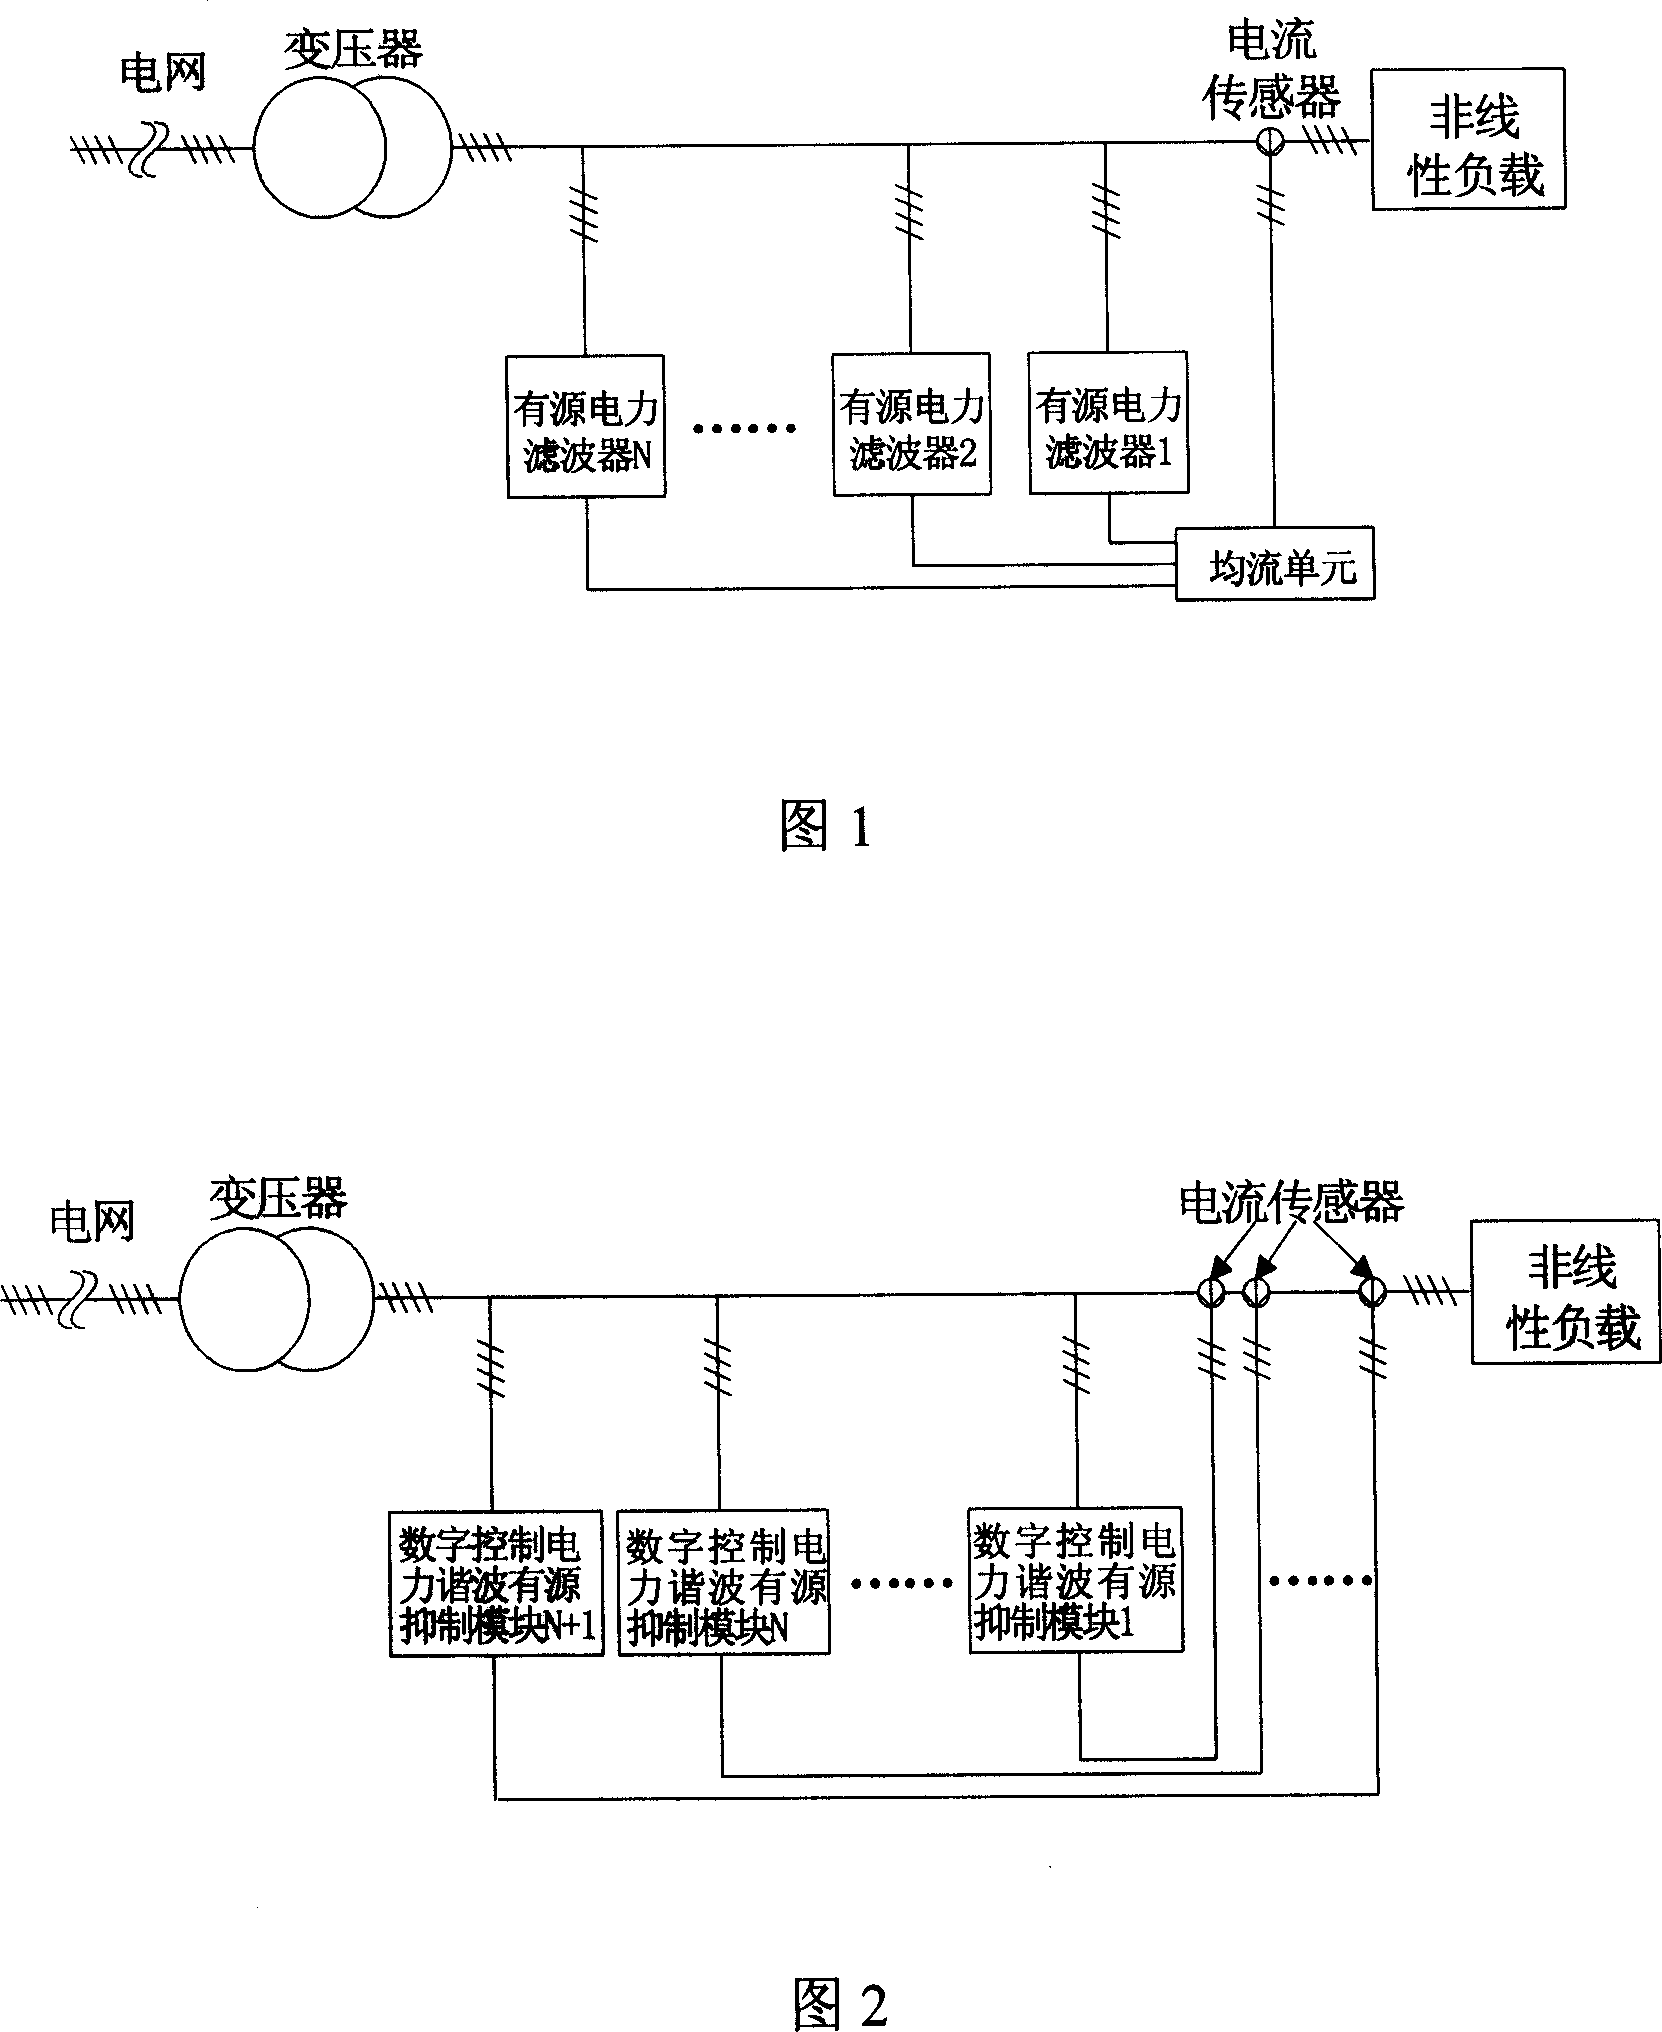 Active suppressing apparatus for modularized parallel digital control electric harmonic